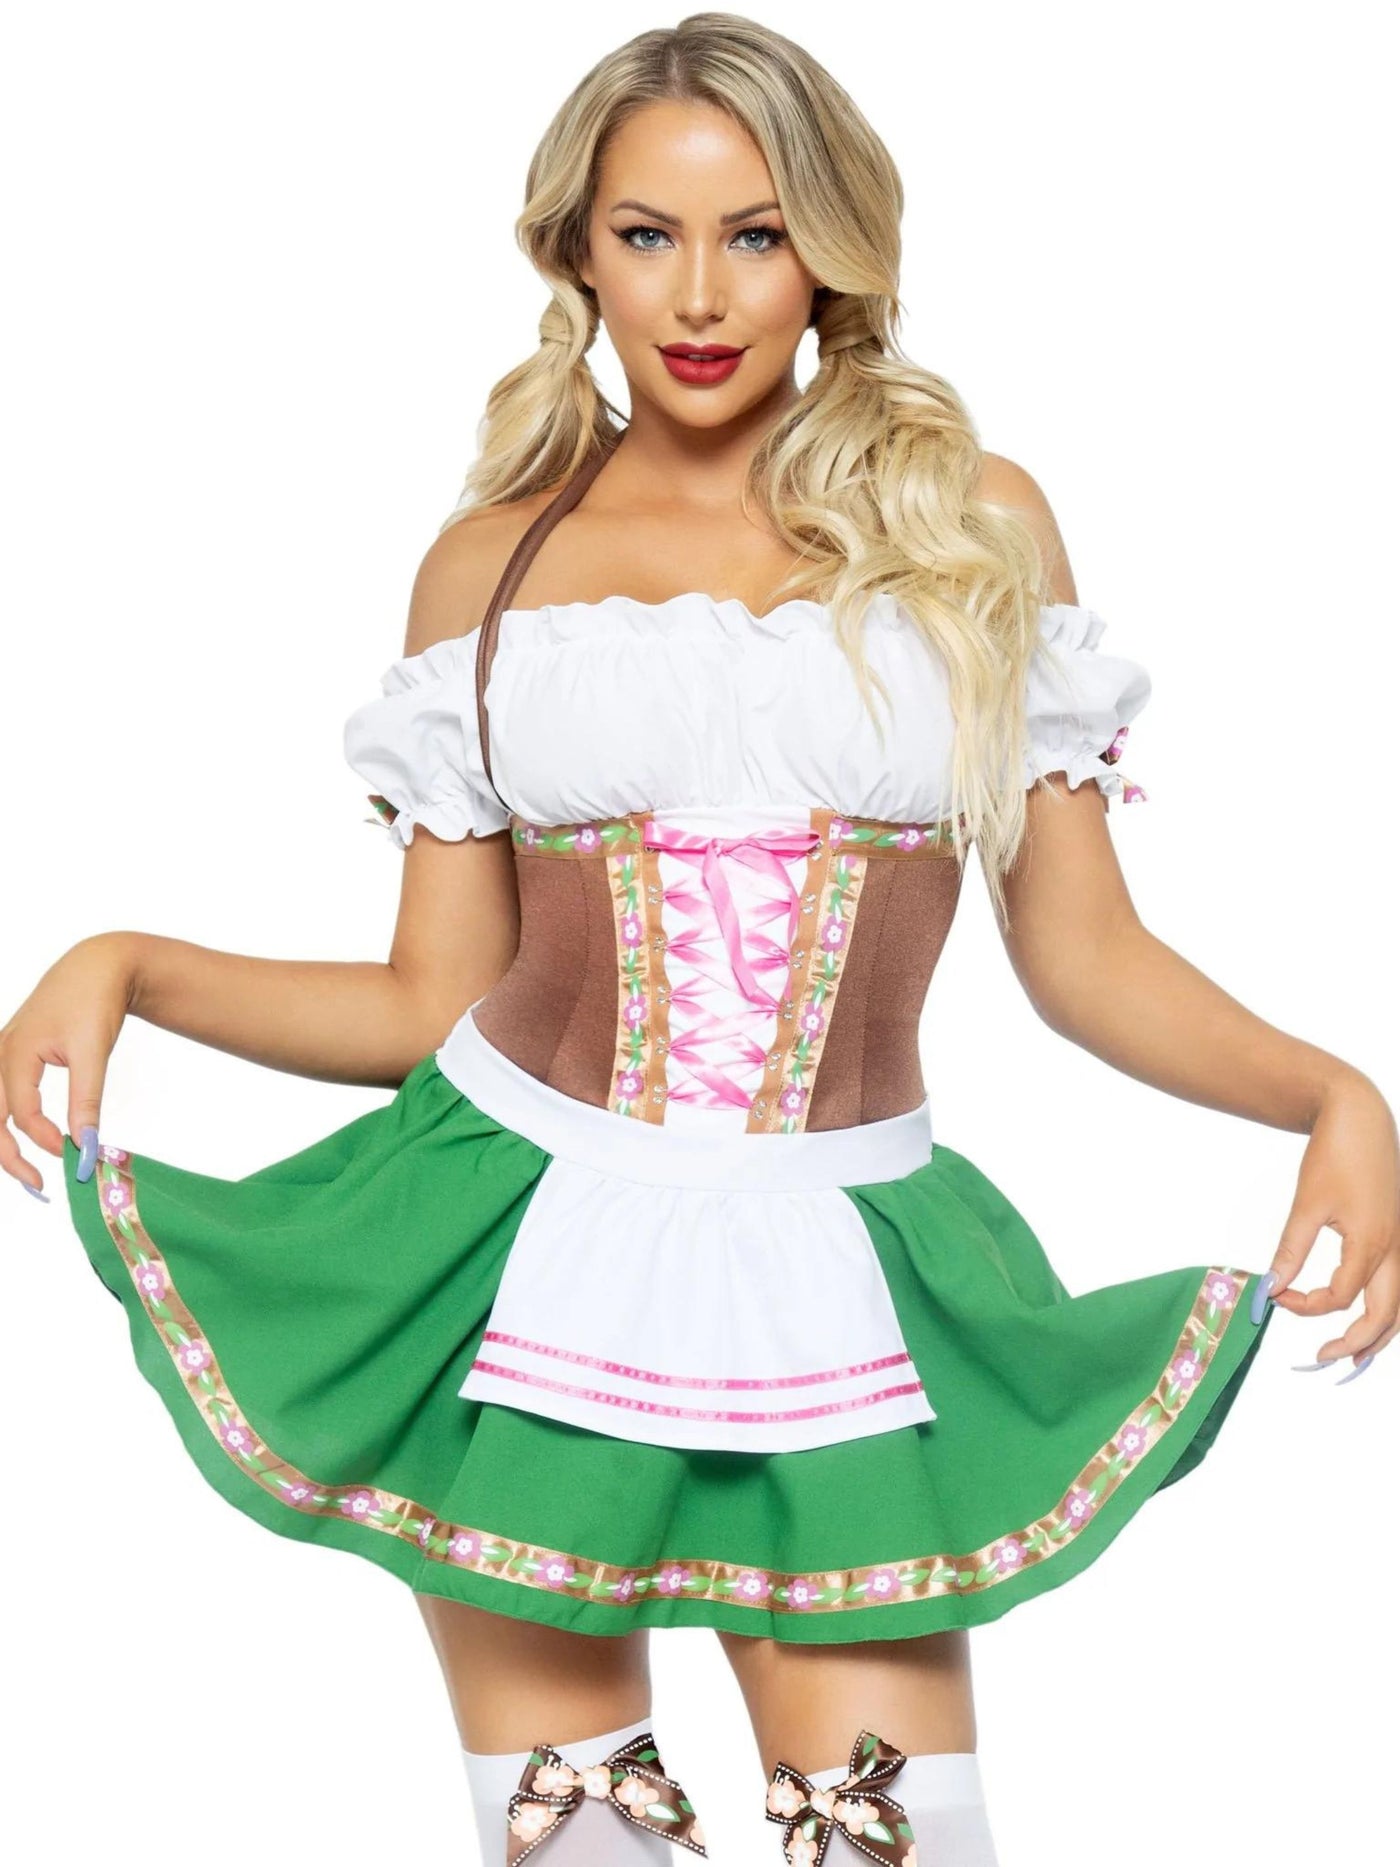 Gretchen Sexy Oktoberfest Beer Maid Costume - Shop Fortune Costumes Lingerie